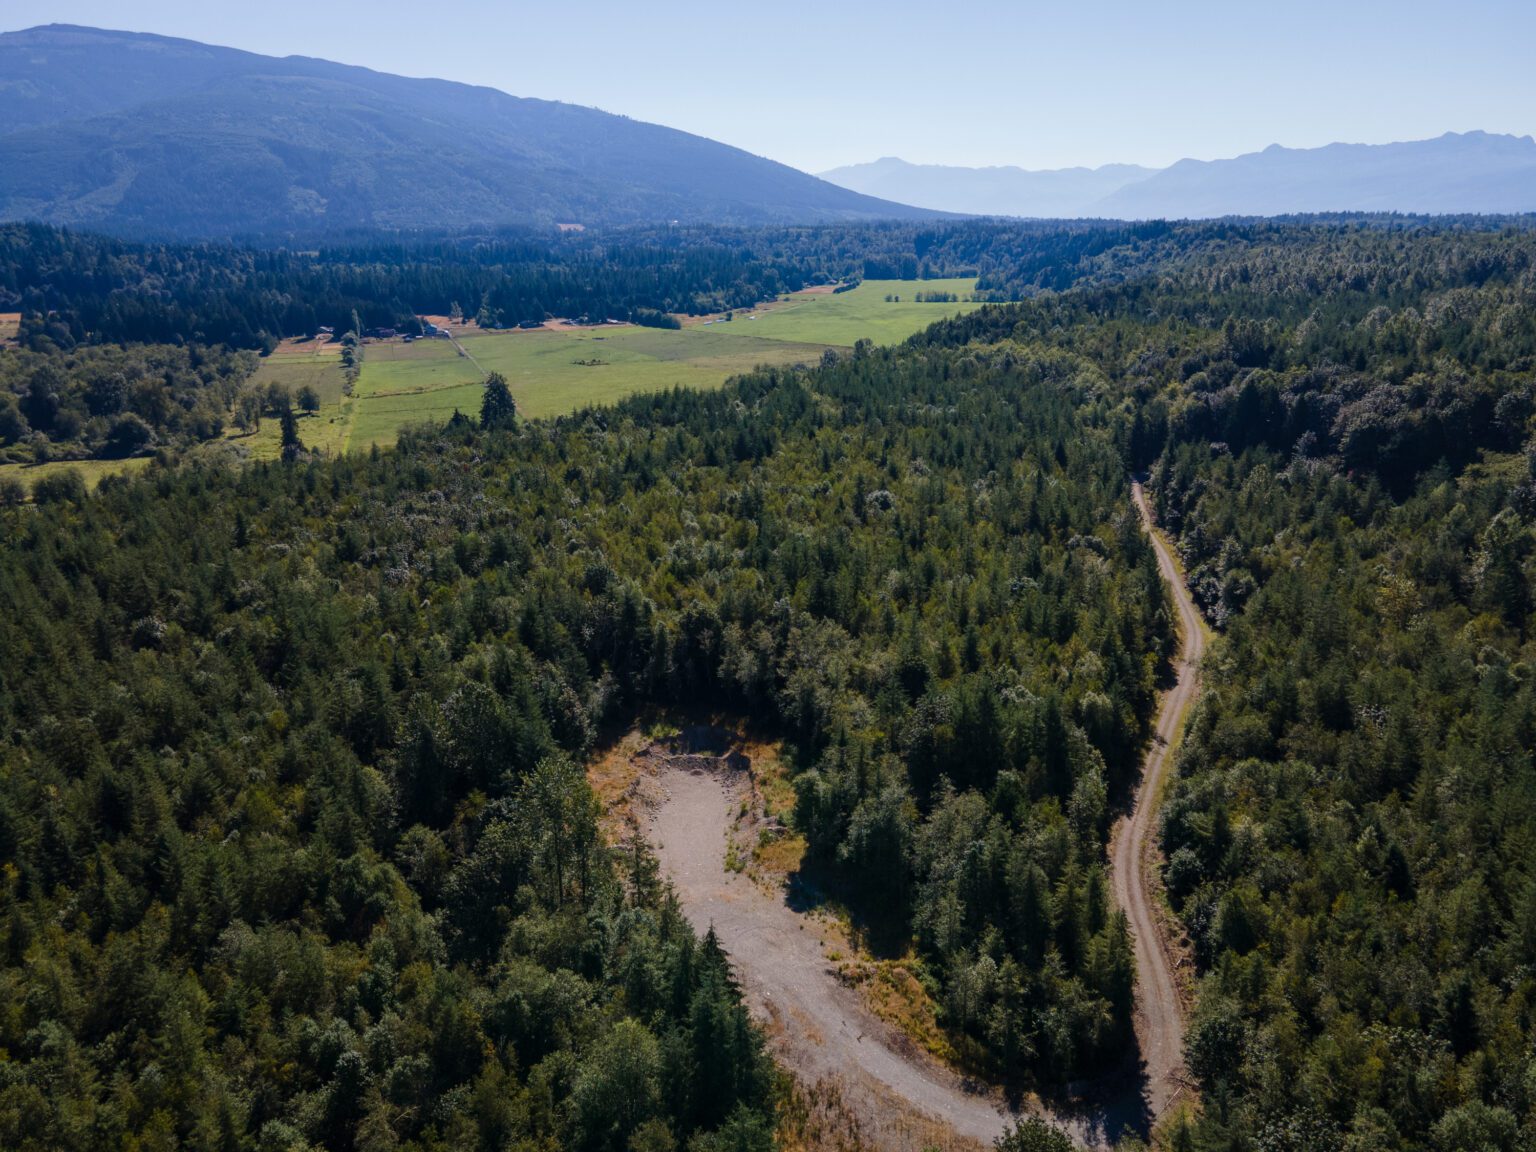 Skagit County released a decision on Concrete Nor'west's proposed 51-acre gravel mine just north of Sedro-Woolley.